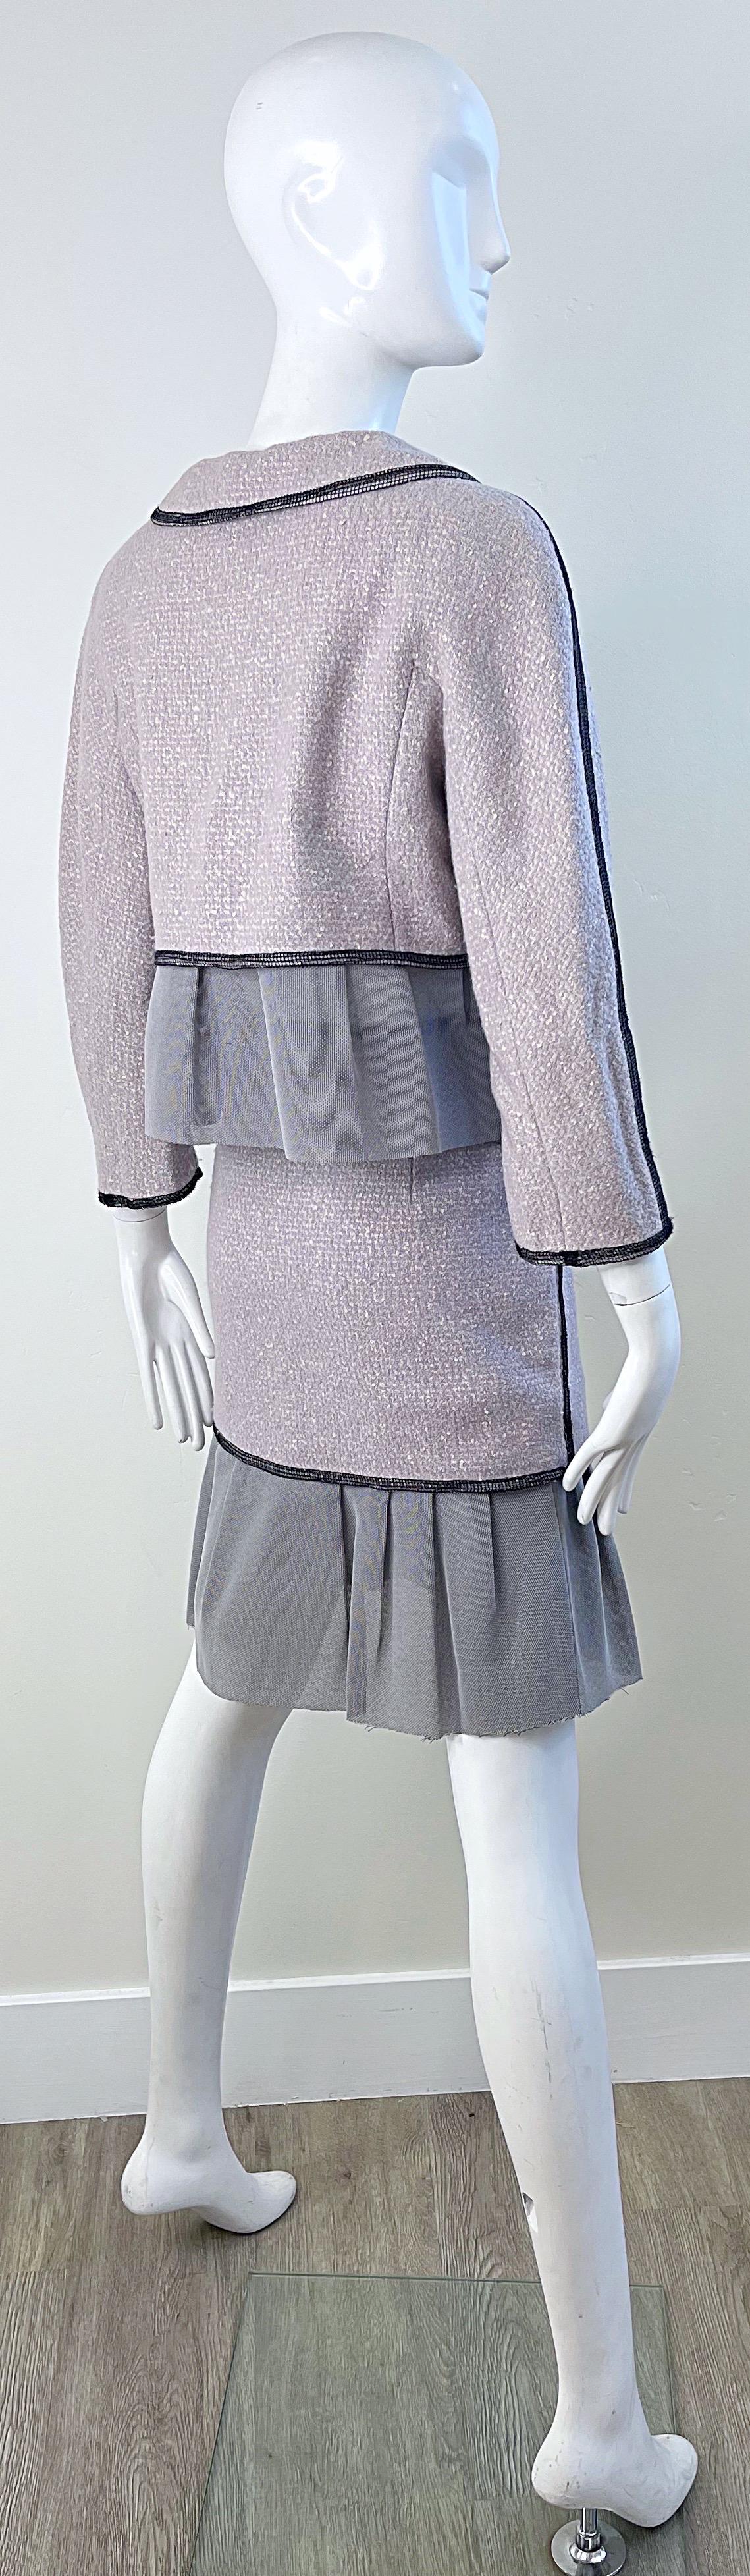 Rochas Couture Runway Fall 2004 Light Purple Black Size 40 - 6 / 8 Skirt Suit In Excellent Condition For Sale In San Diego, CA